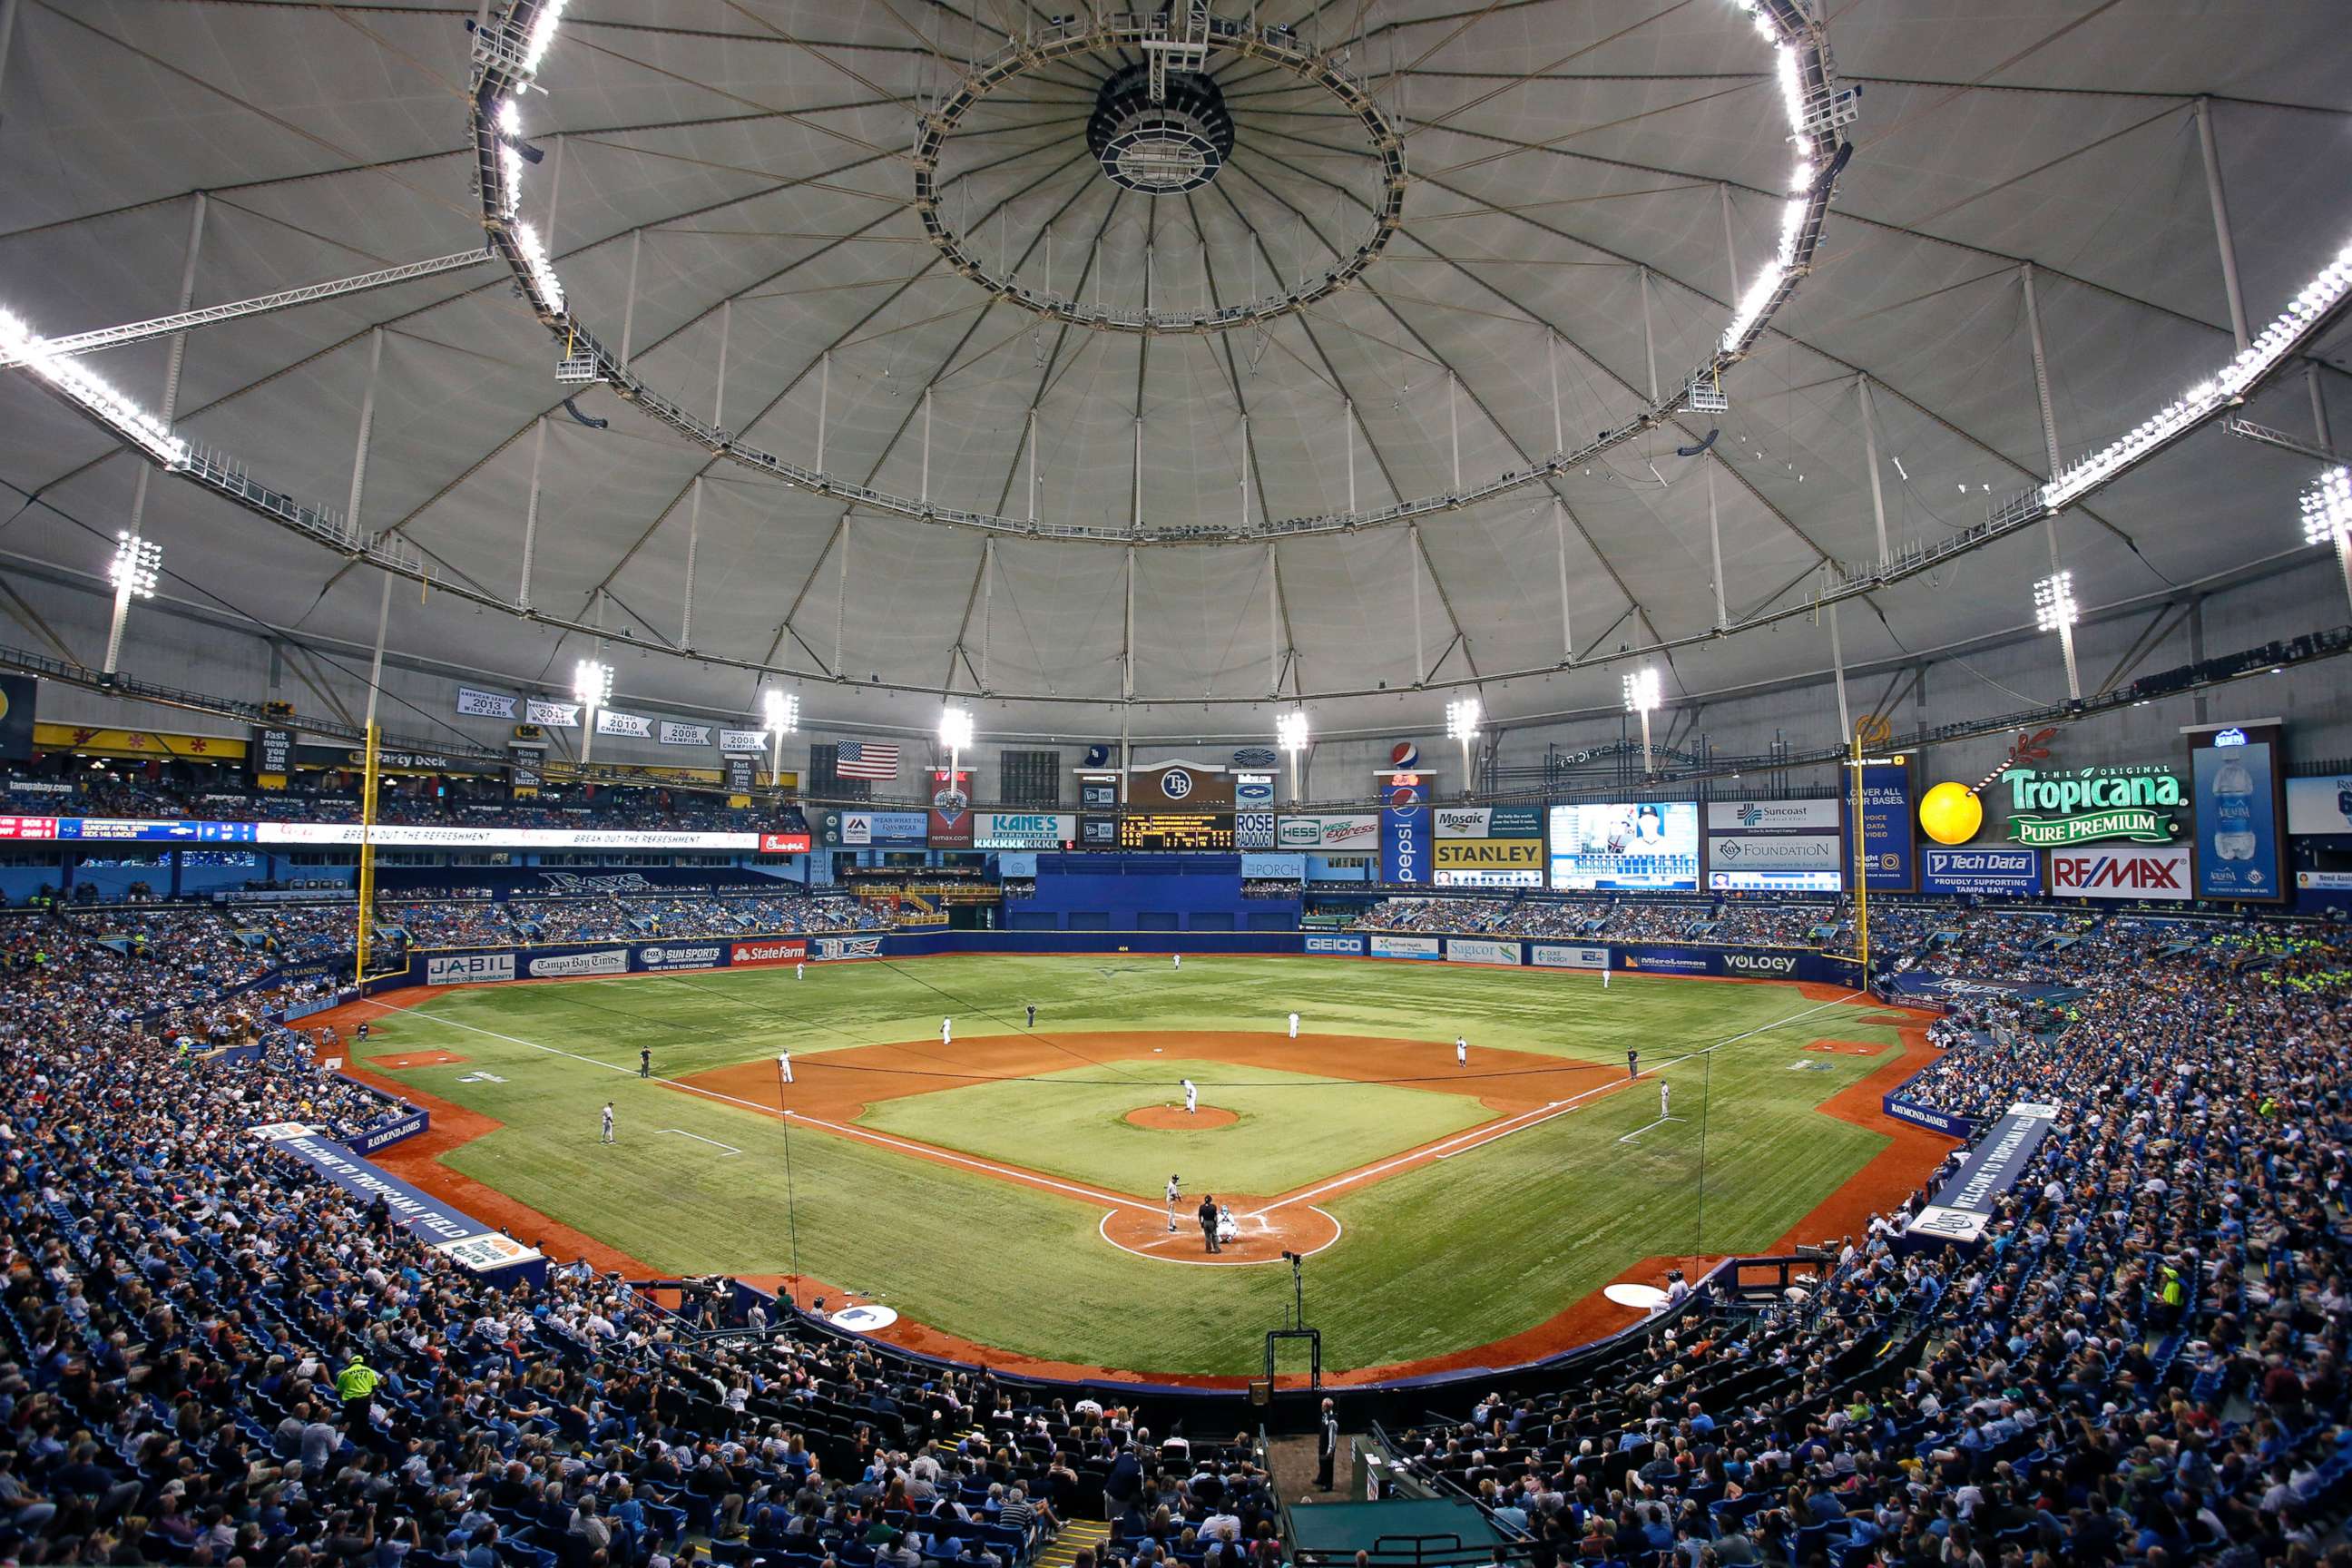 PHOTO: General view as baseball fans watch the Tampa Bay Rays take on the New York Yankees during the sixth inning of a game on April 17, 2014 at Tropicana Field in St. Petersburg, Florida. 